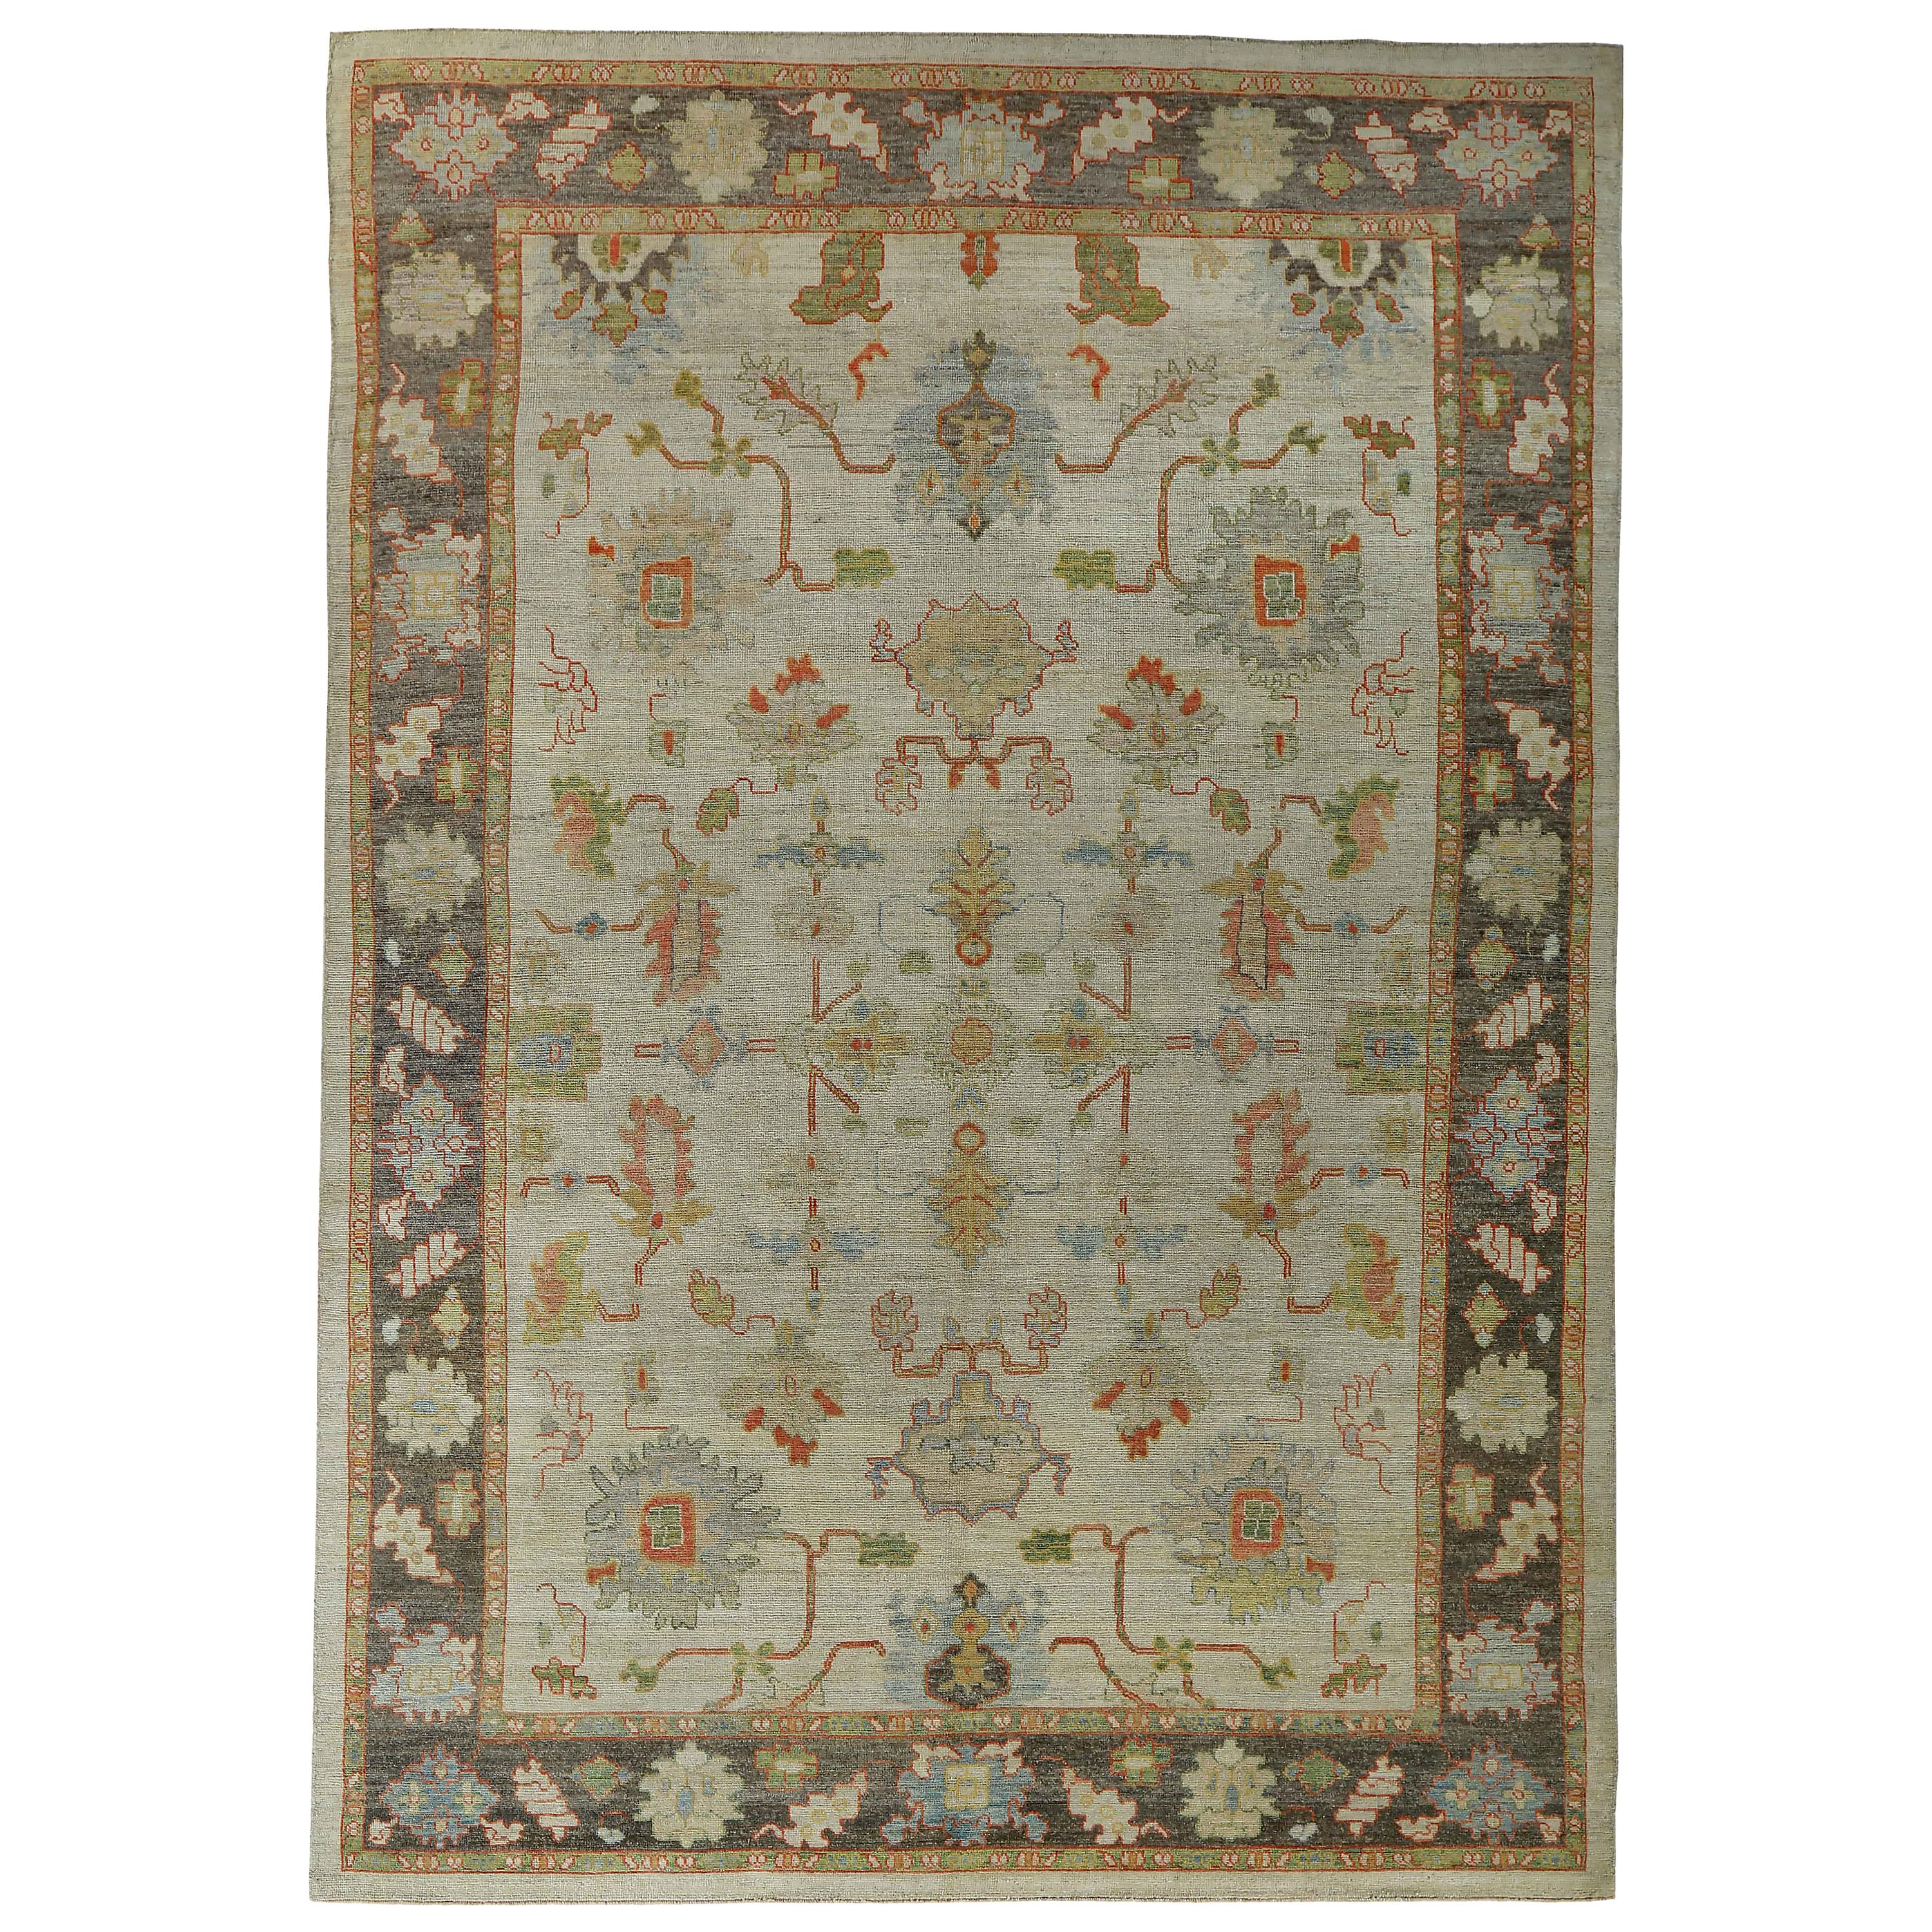 New Turkish Oushak Rug with Green and Red Floral Details on Ivory Field